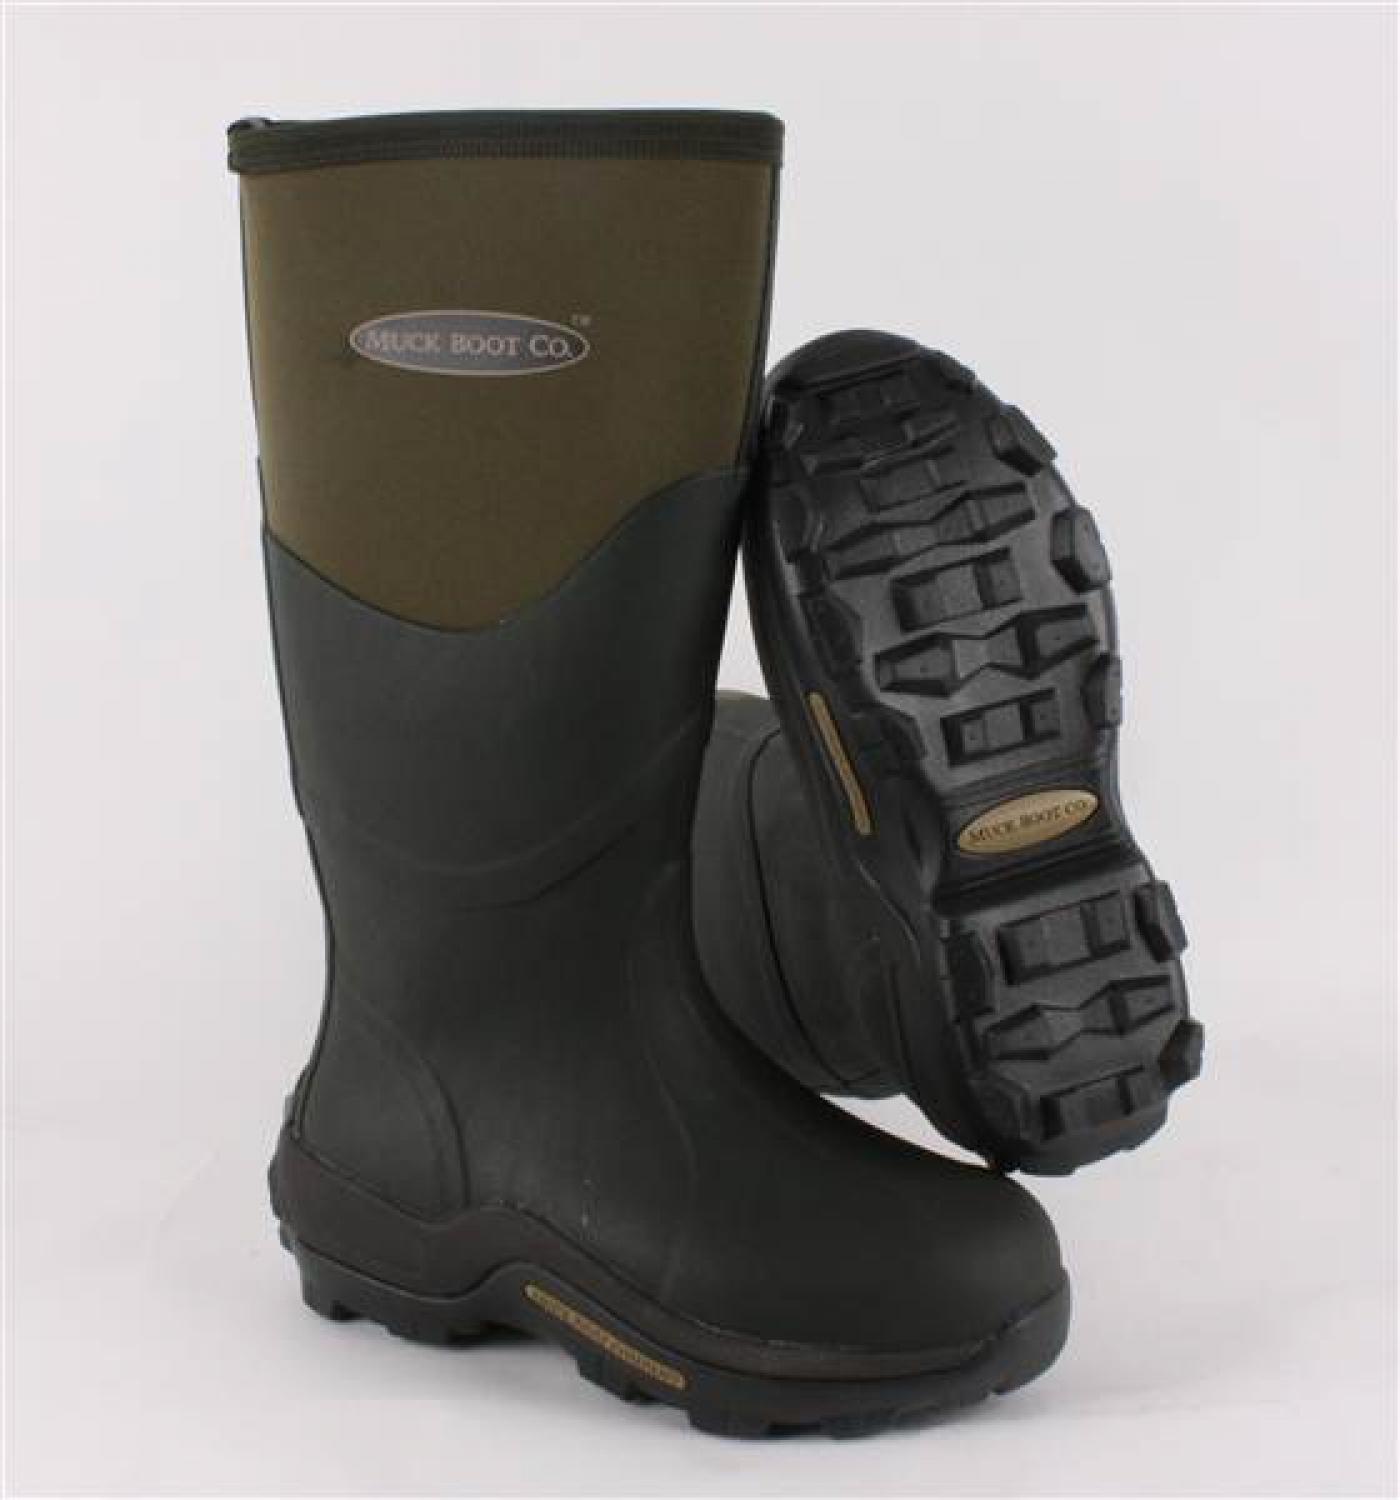 Buy Muckmaster / Tay Field Muck Boot from Fane Valley Stores ...